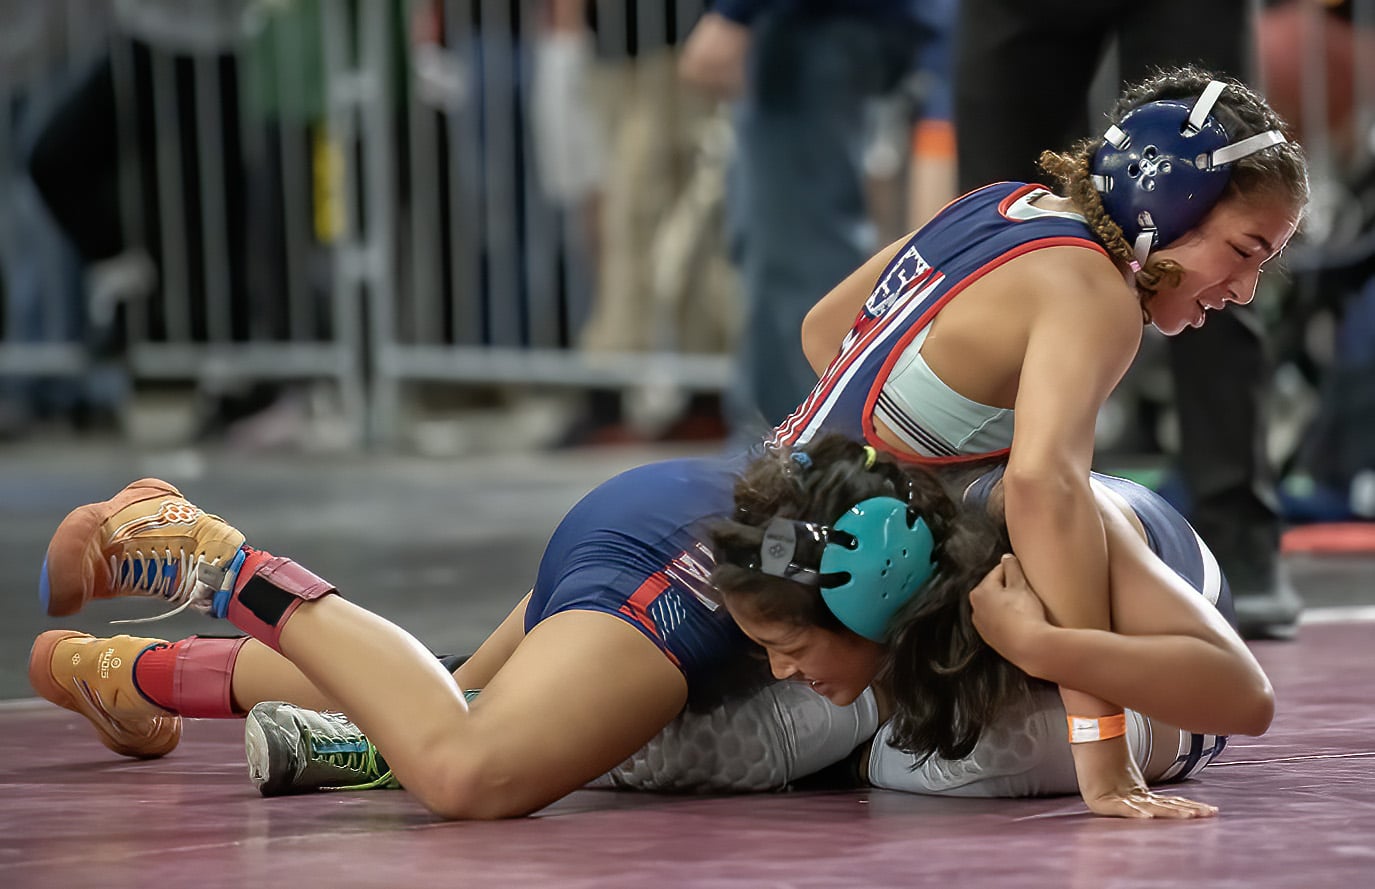 Springstead High’s 105-pound Gianella Waczak took on Helena Alcantar from Gulf Breeze High, losing the decision 5-7 in the second round of the FHSAA IBT Championships in Kissimmee. Photo by JOE DiCRISTOFALO